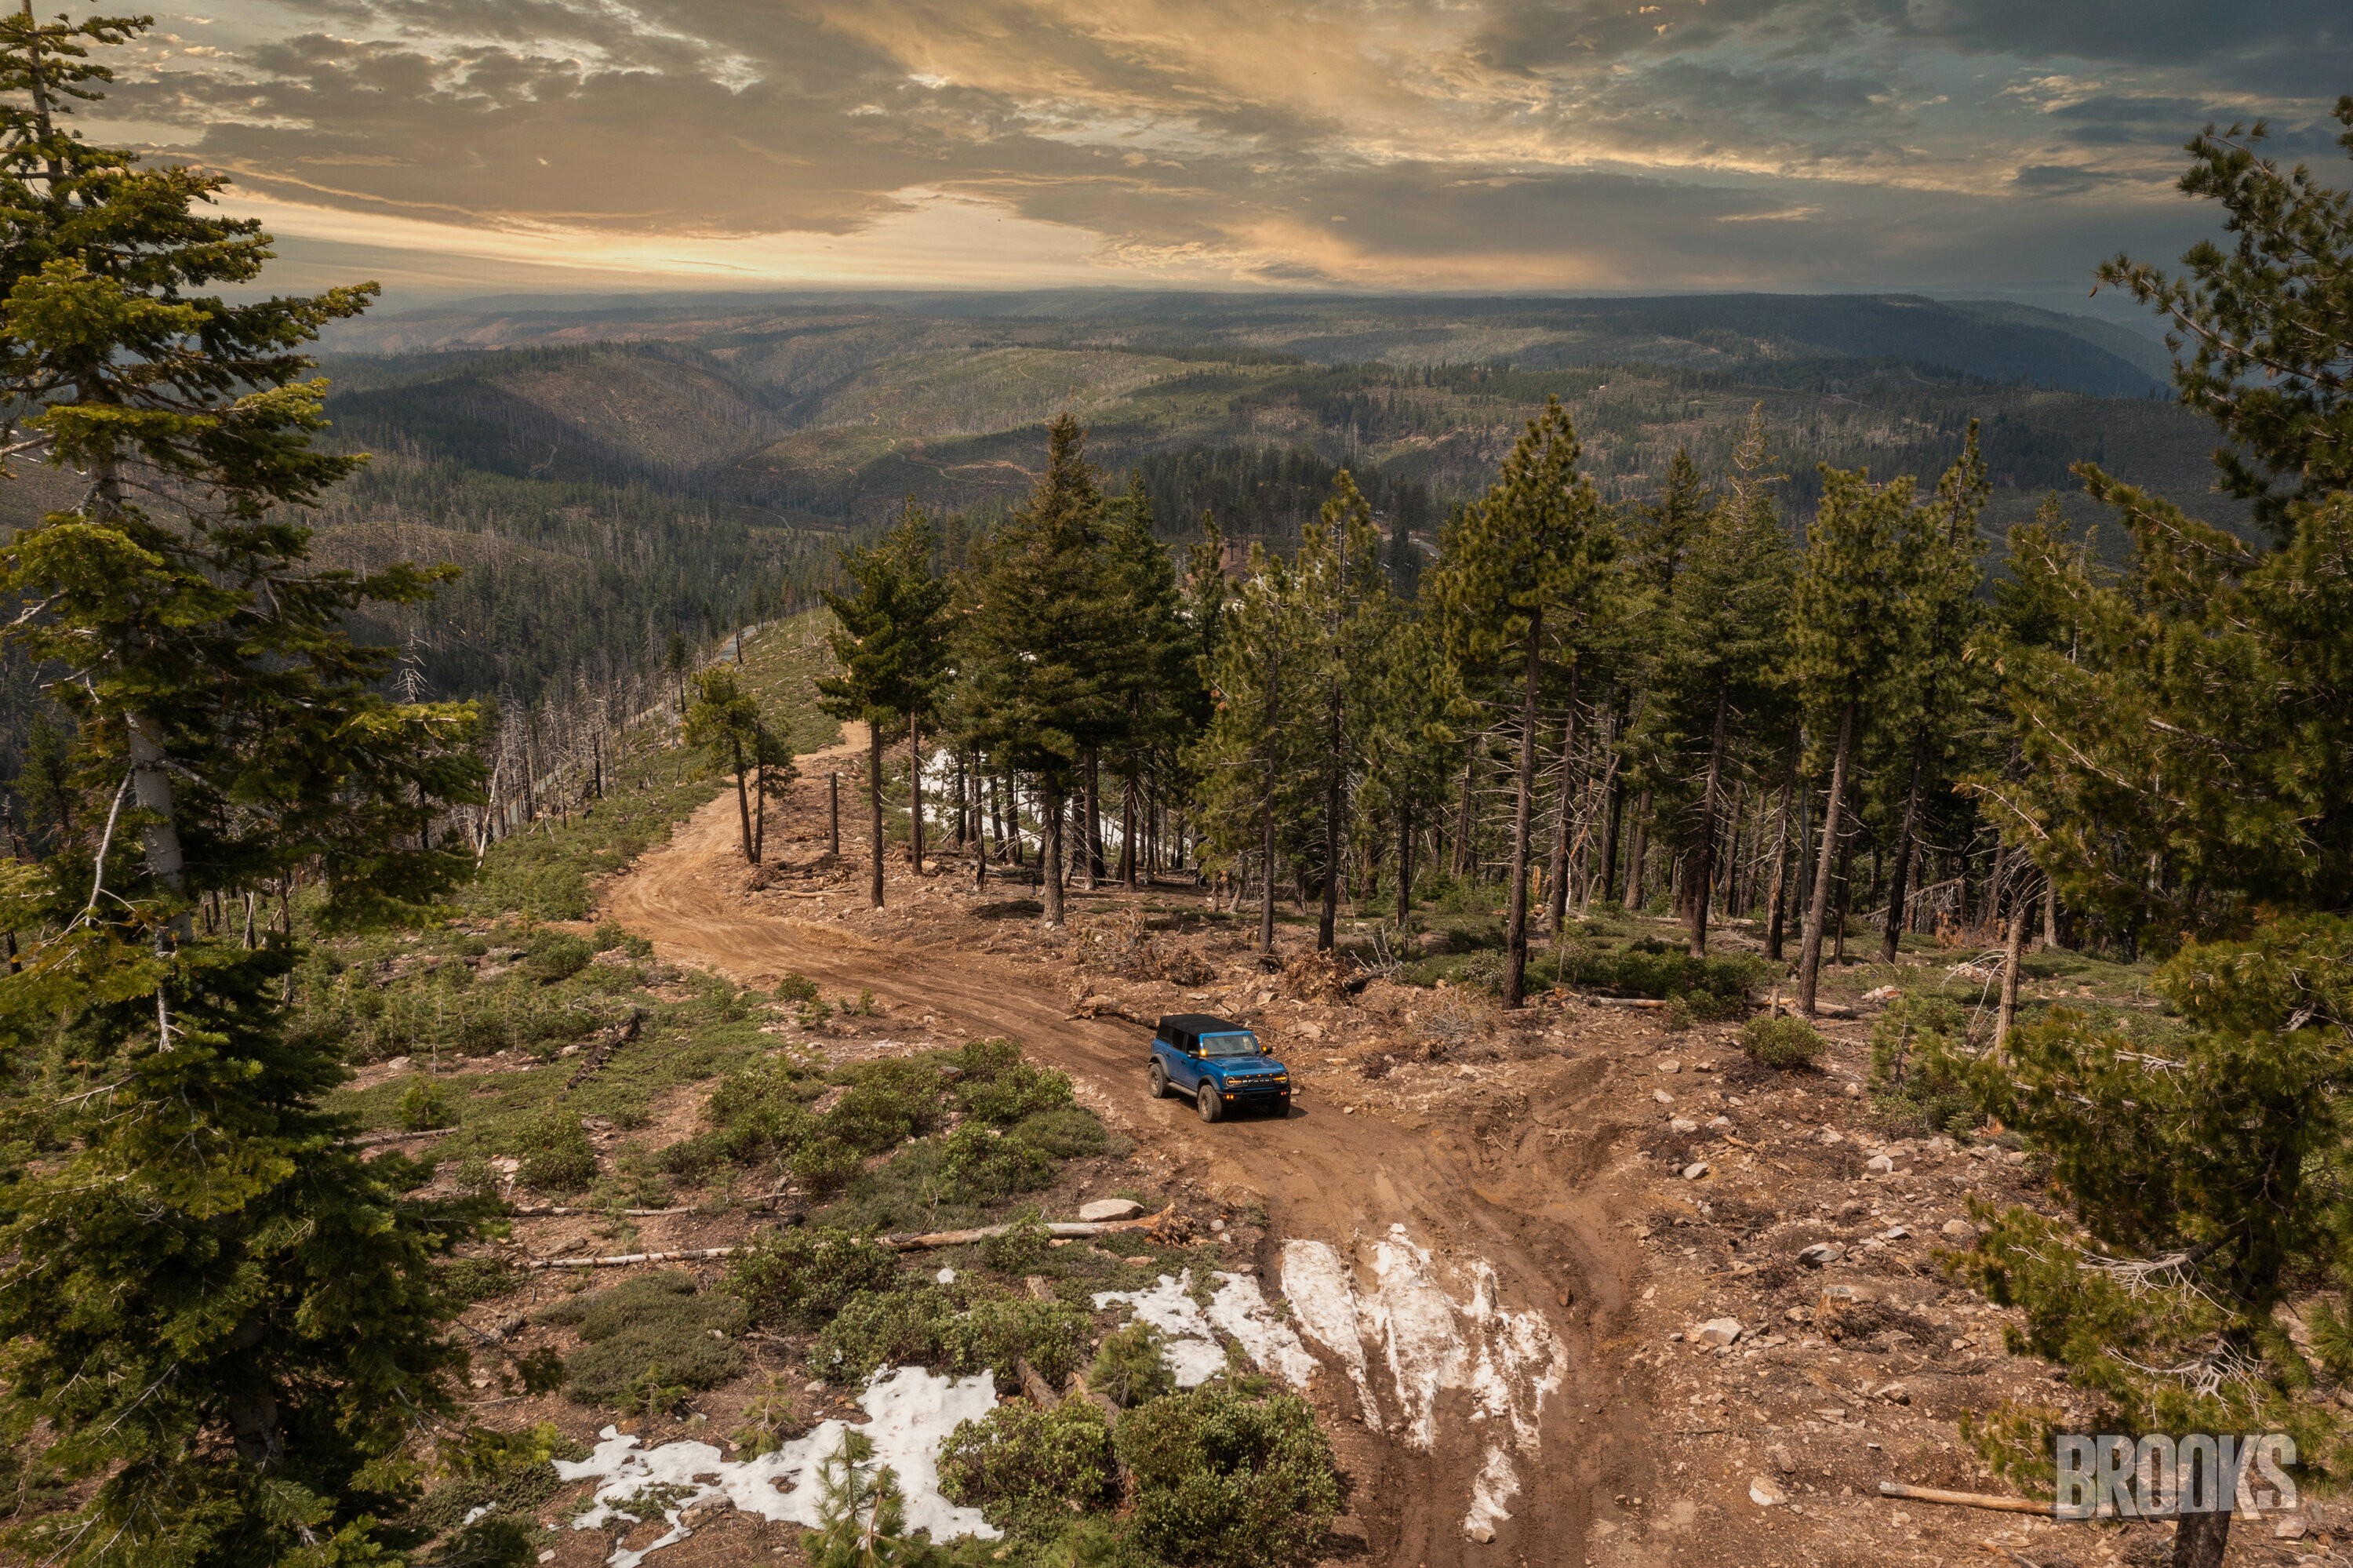 Ford Bronco Solo trip up to the hills this weekend DJI_0600-Edit